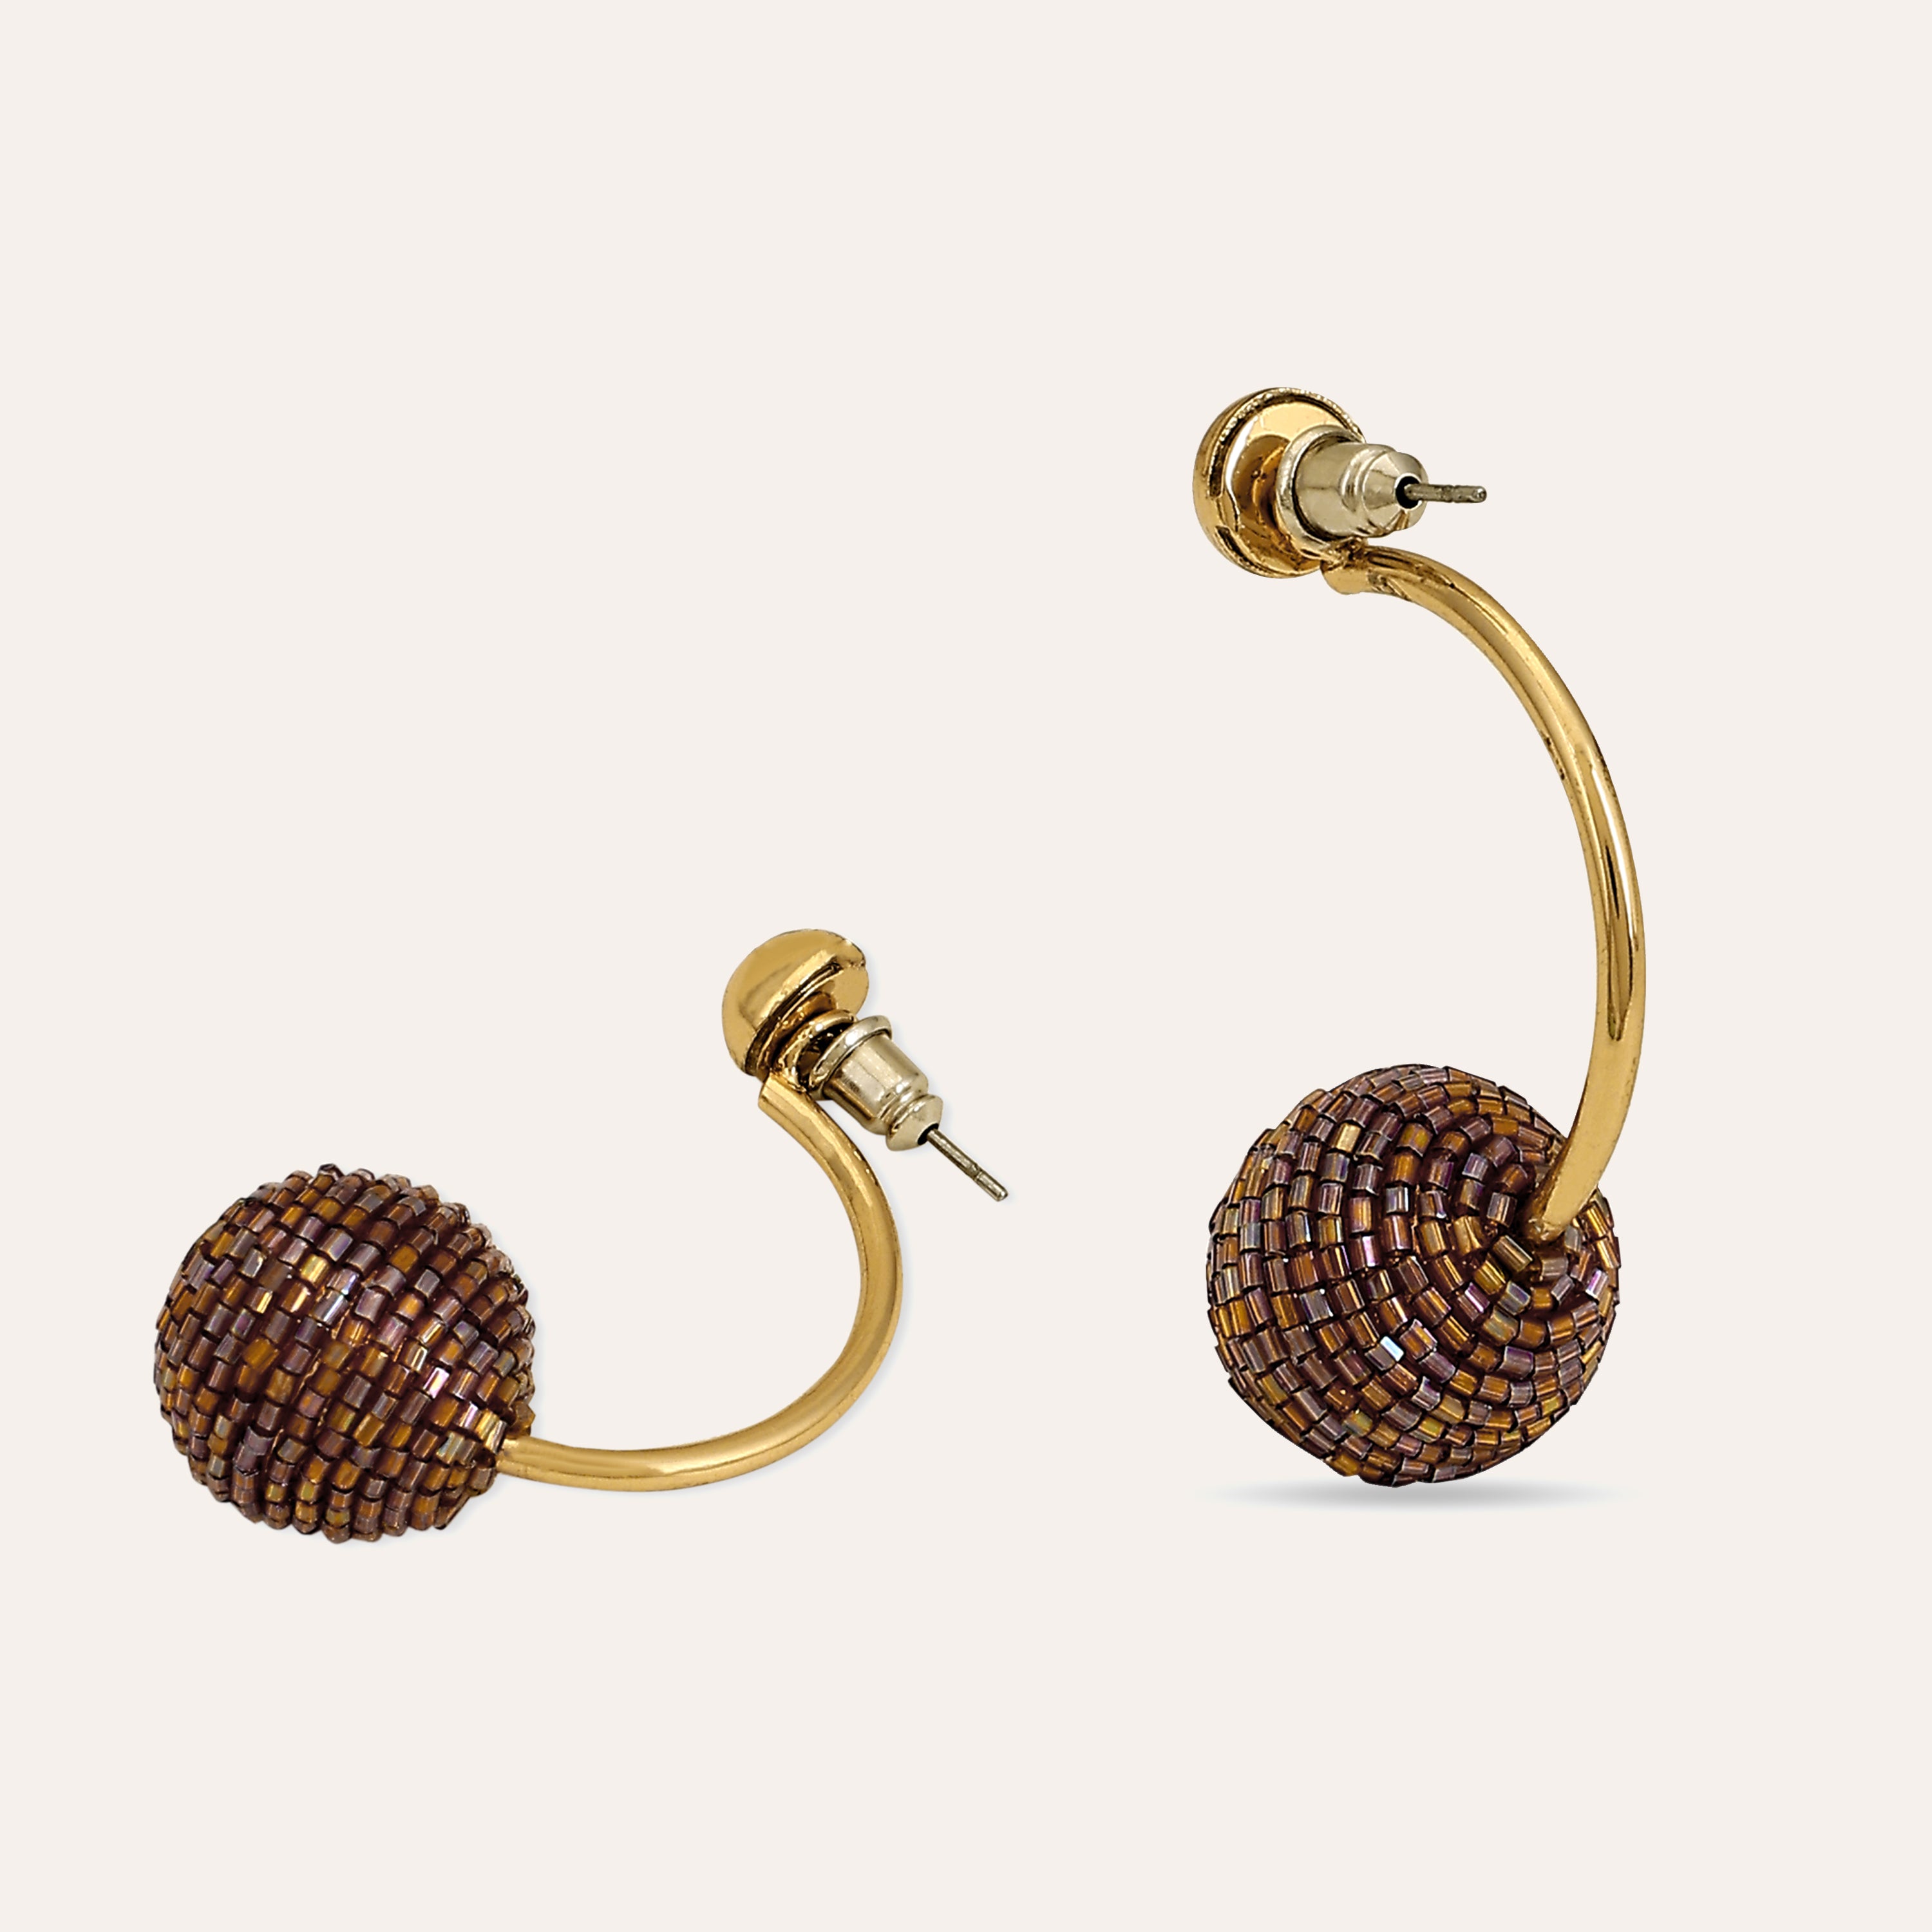 TFC Festive stunner gold earrings-Discover daily wear gold earrings including stud earrings, hoop earrings, and pearl earrings, perfect as earrings for women and earrings for girls.Find the cheapest fashion jewellery which is anti-tarnish only at The Fun company